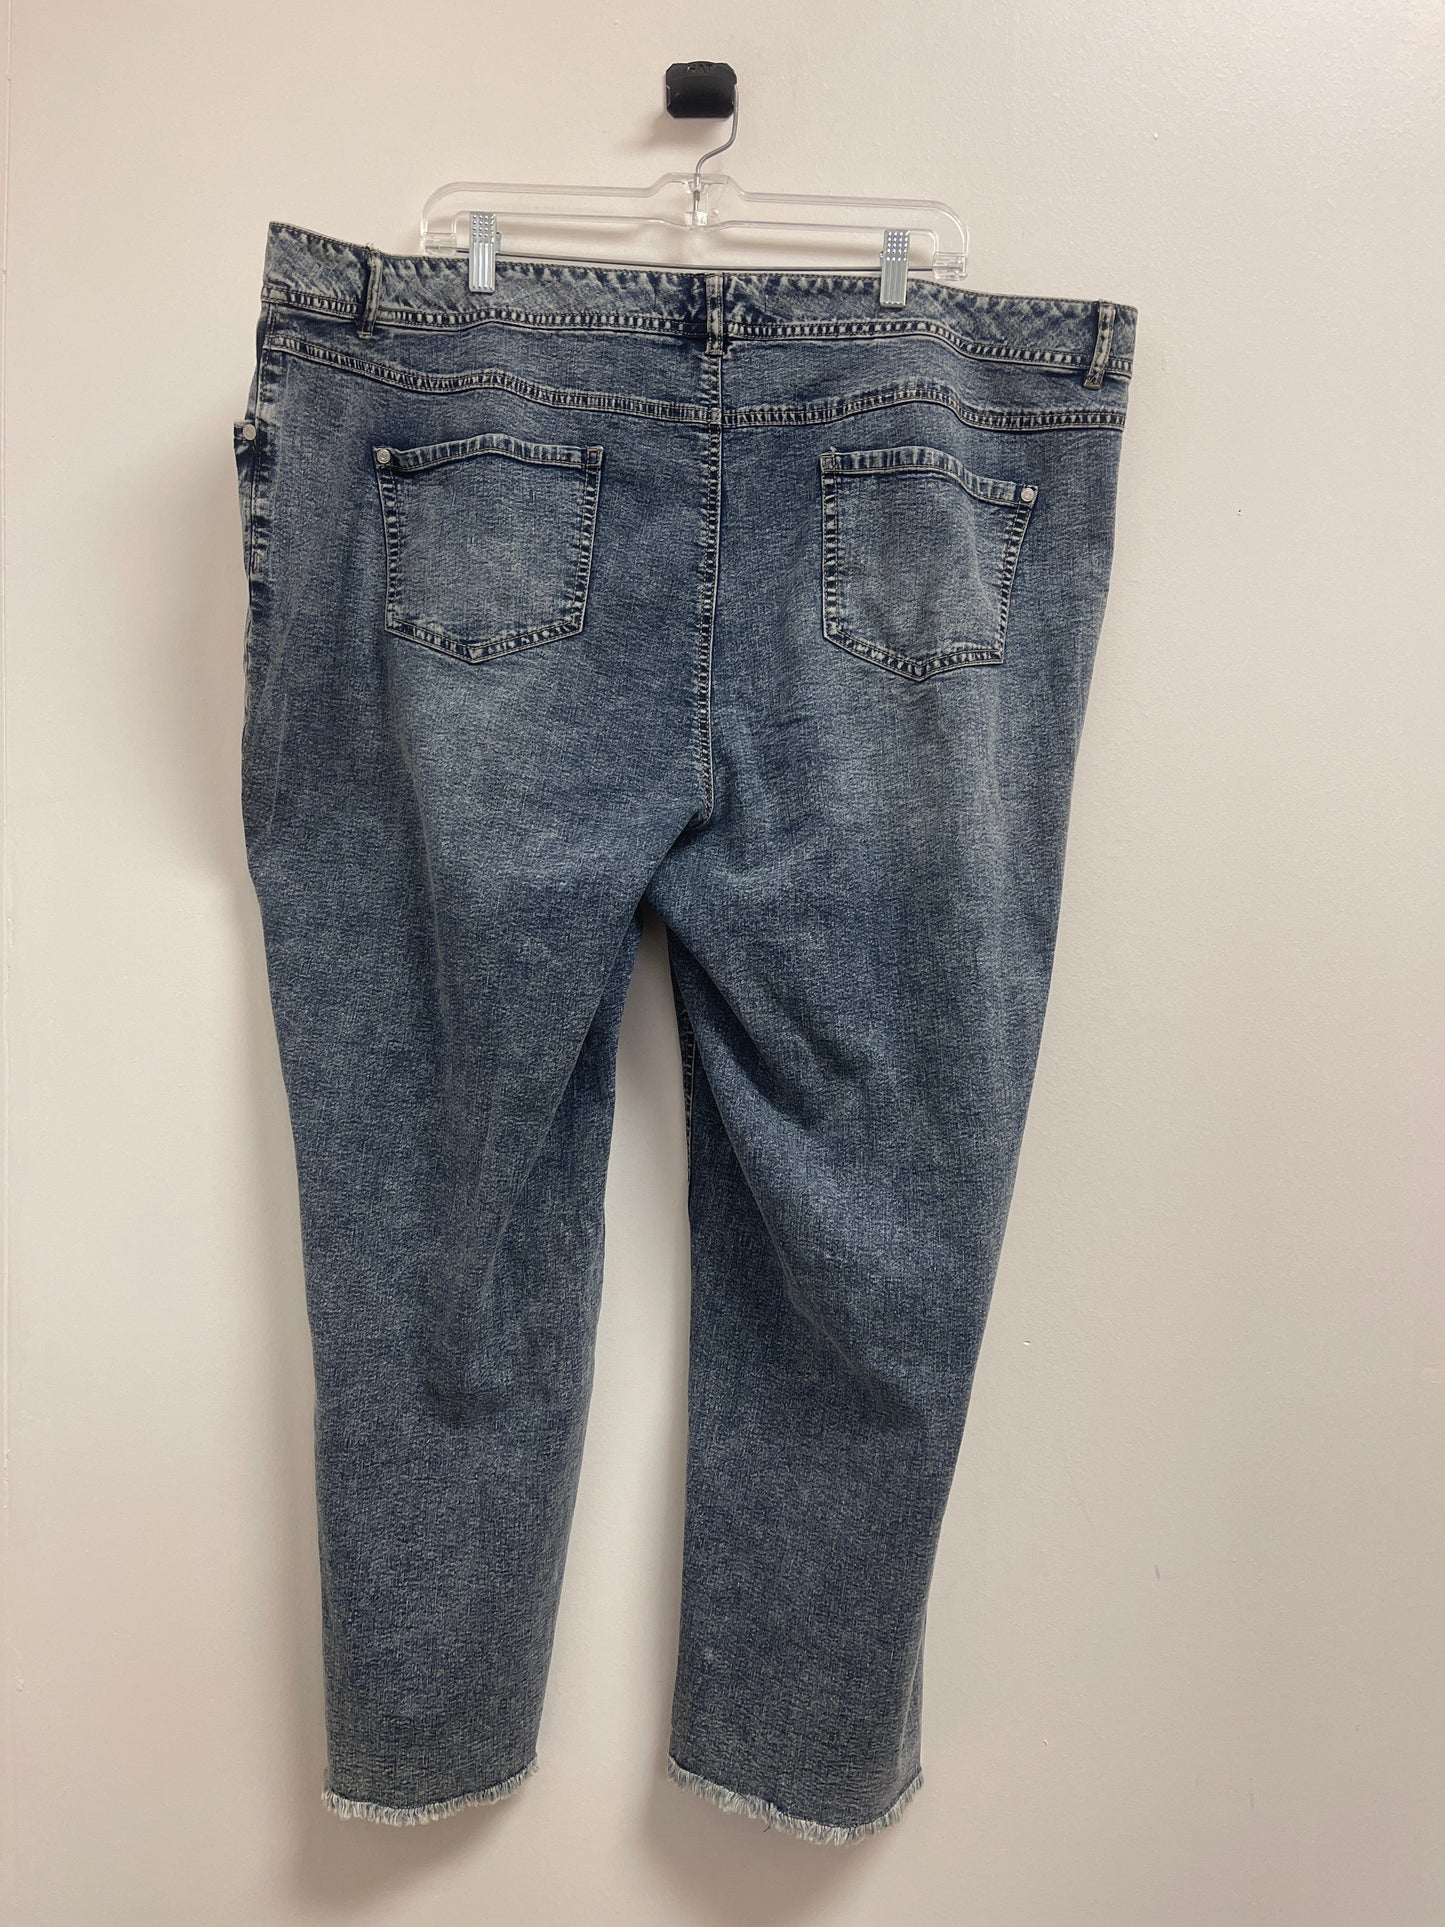 Jeans Skinny By Cato  Size: 24